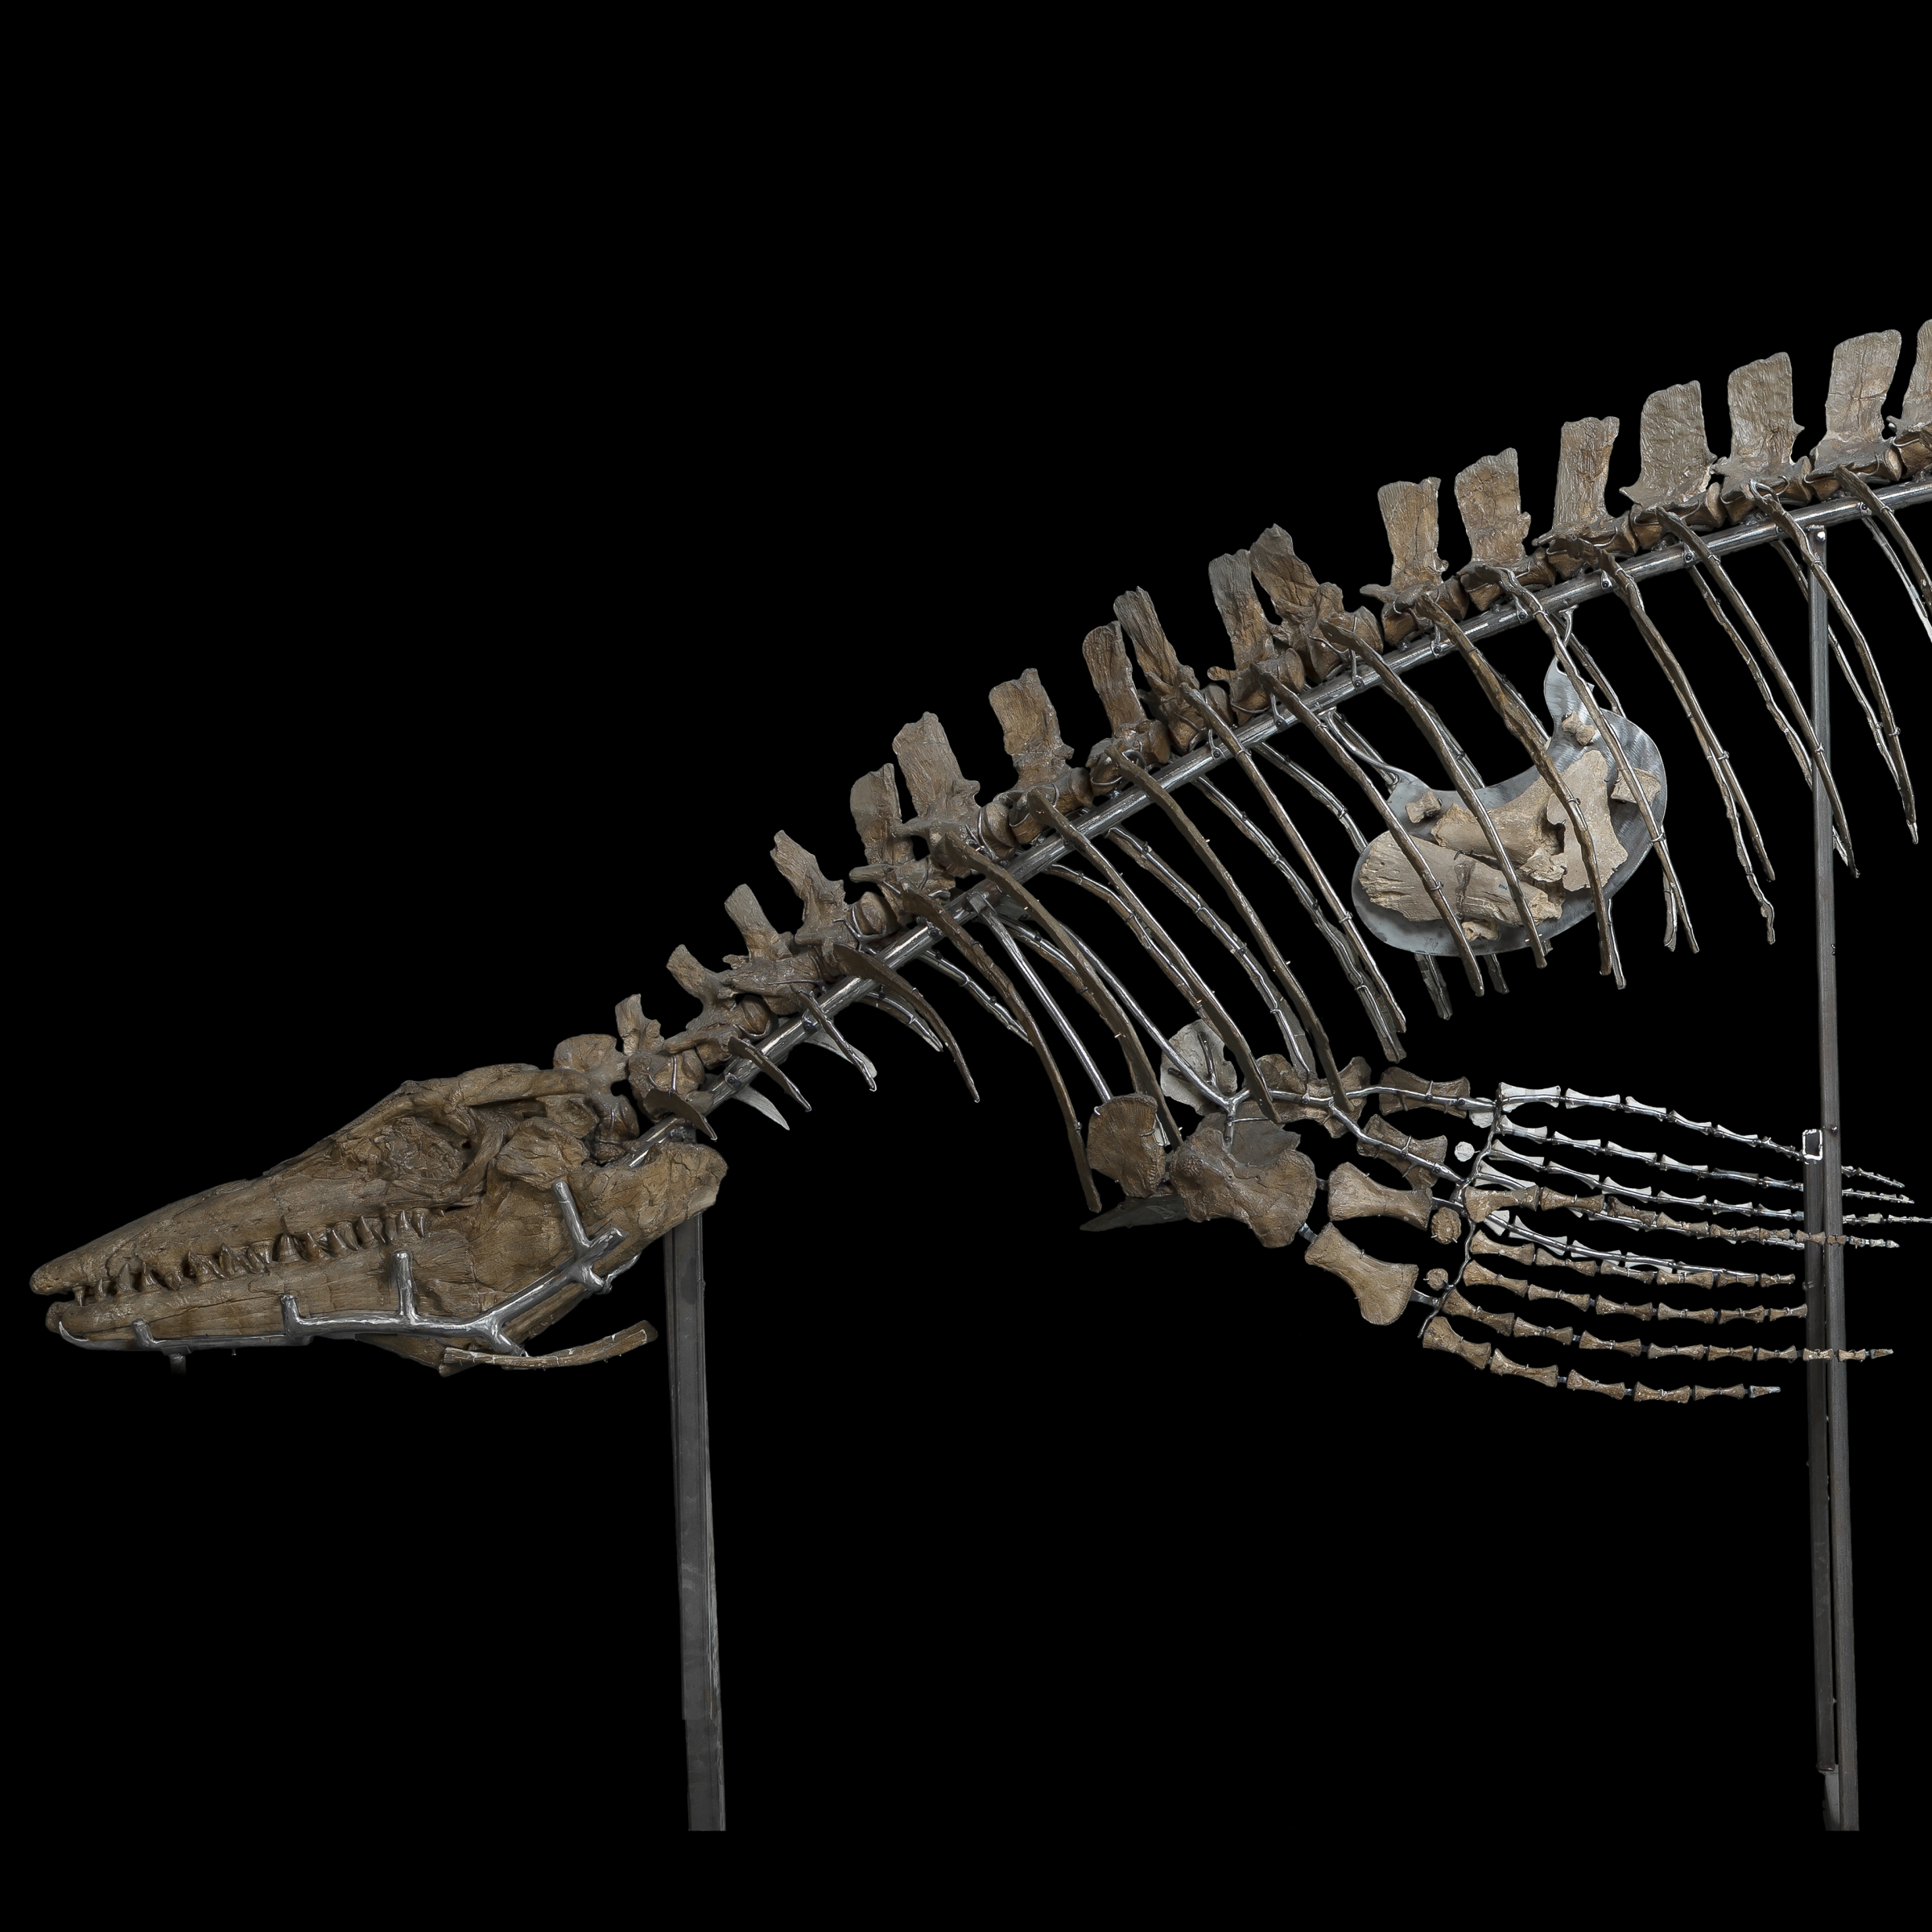 Upper half of a marine reptile with bones visible in its stomach